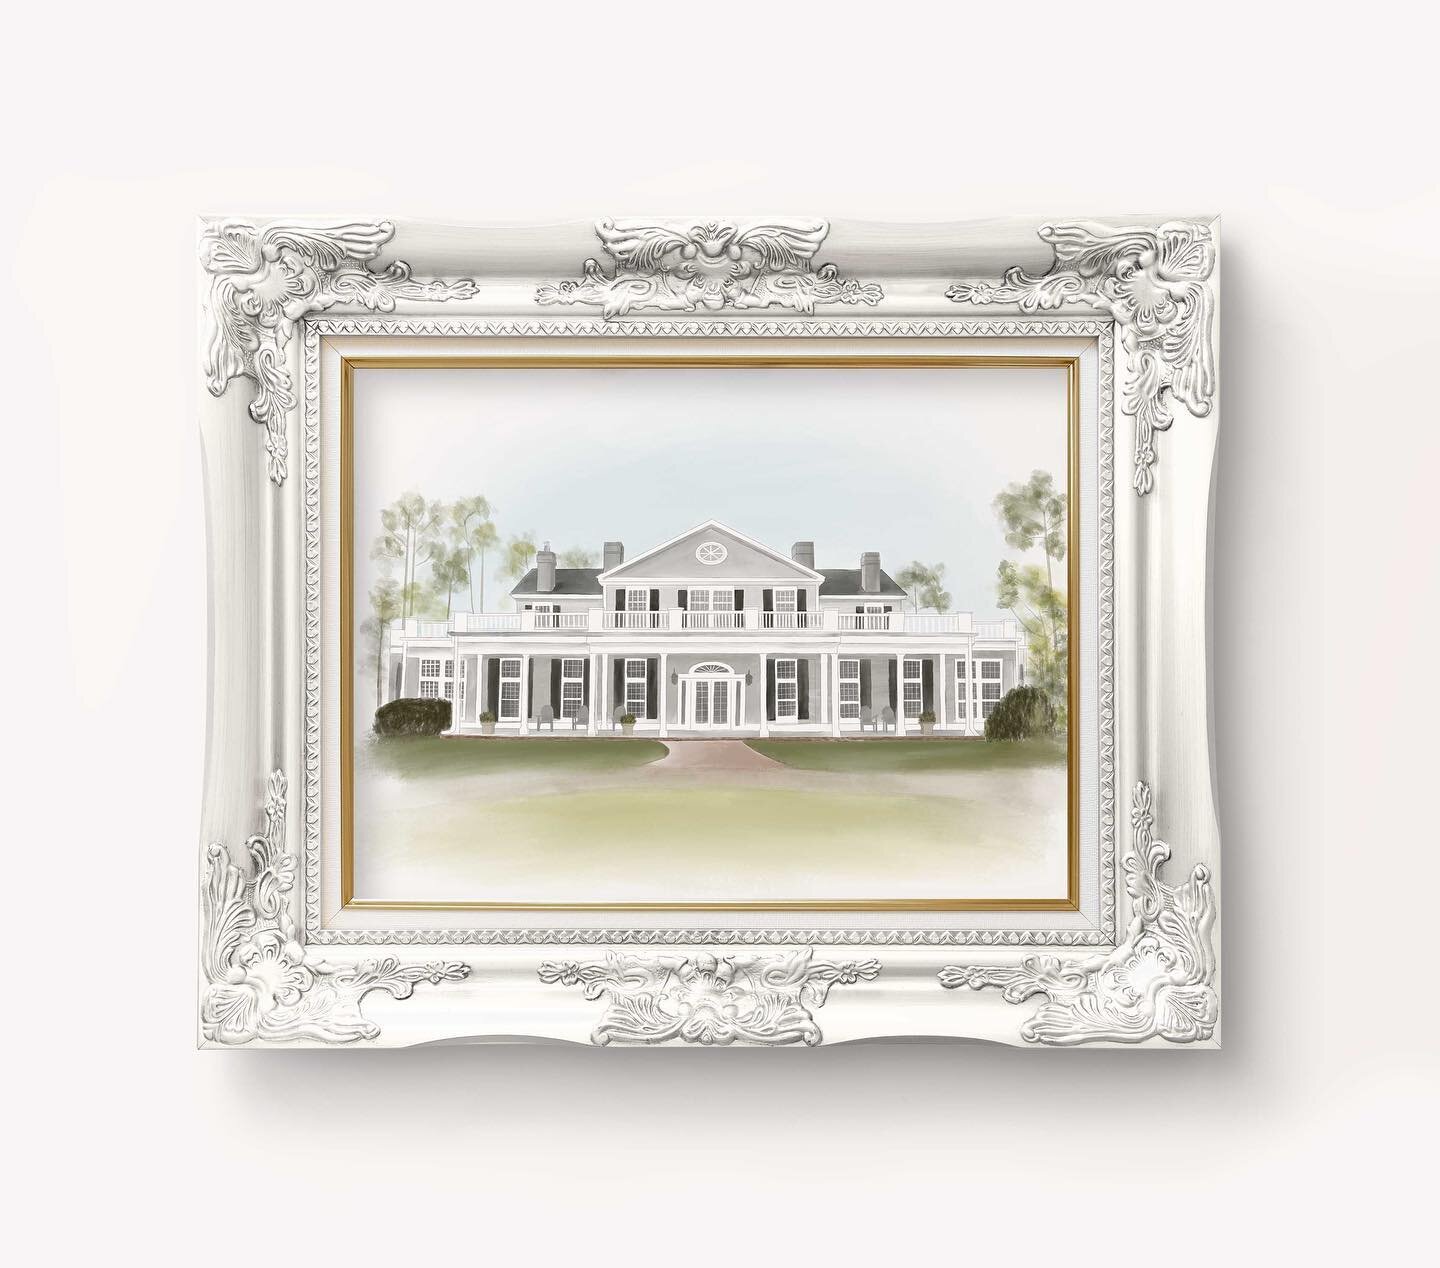 Enjoyed creating this venue illustration for @__mj_fit__ 

Steelwood Country Club
Point Clear, Alabama

#weddingvenue #weddingvenueillustration #weddinggifts #weddinggift #forthebride #watercolorpainting